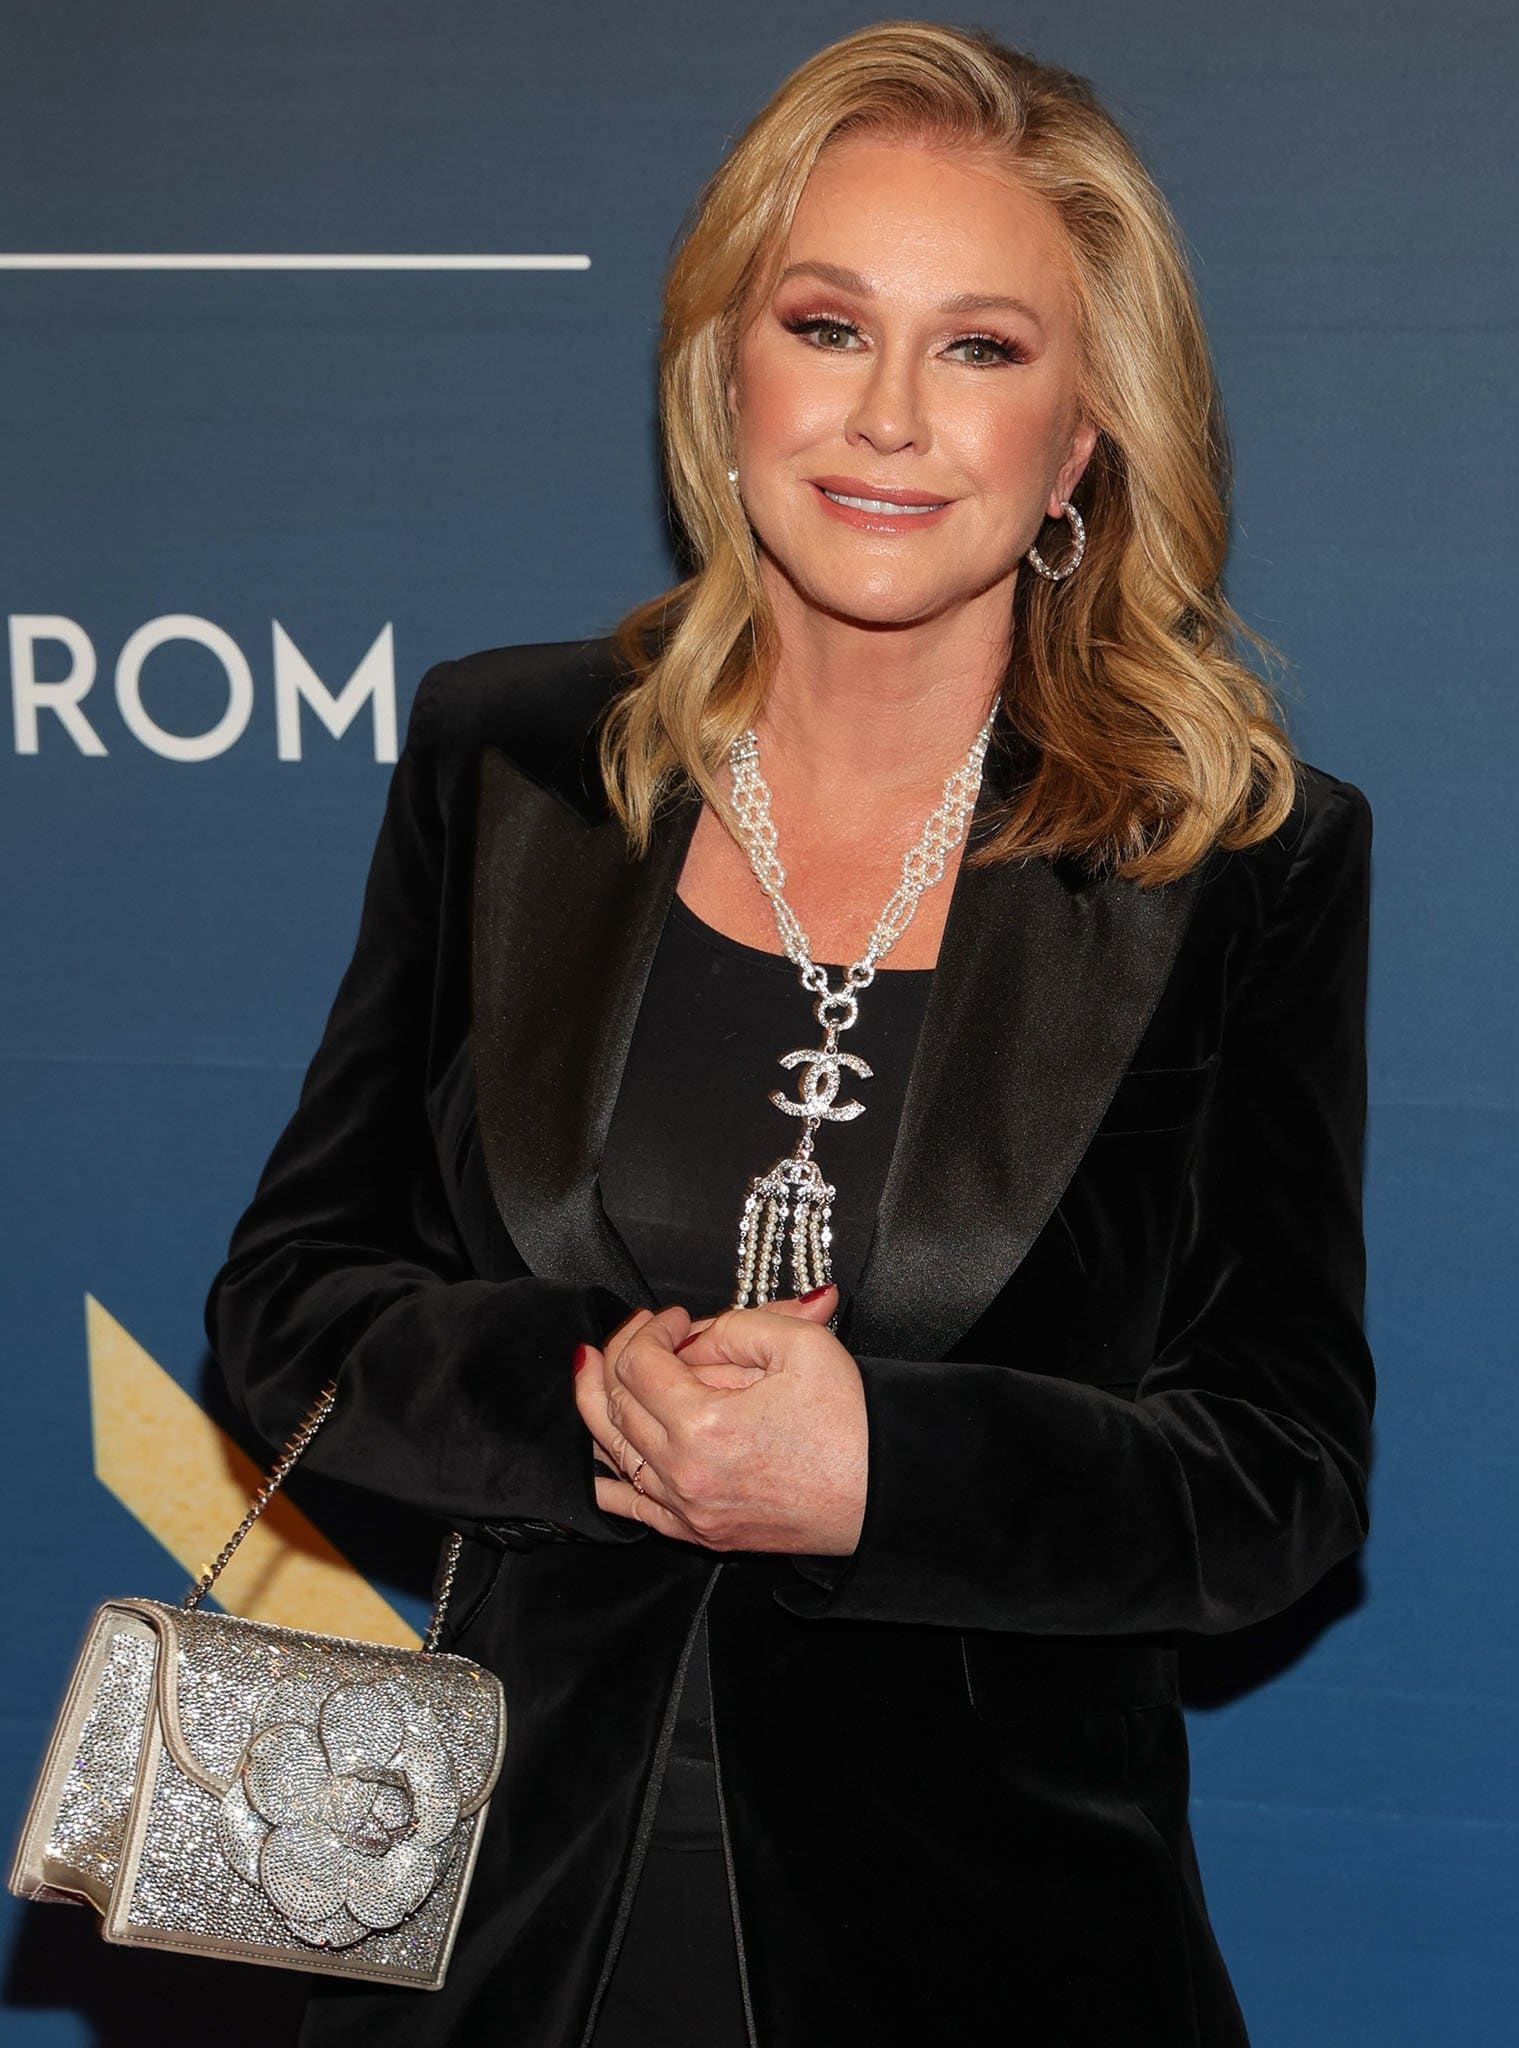 Fashion designer Kathy Hilton started her acting career when she was nine and is currently on The Real Housewives of Beverly Hills season 11